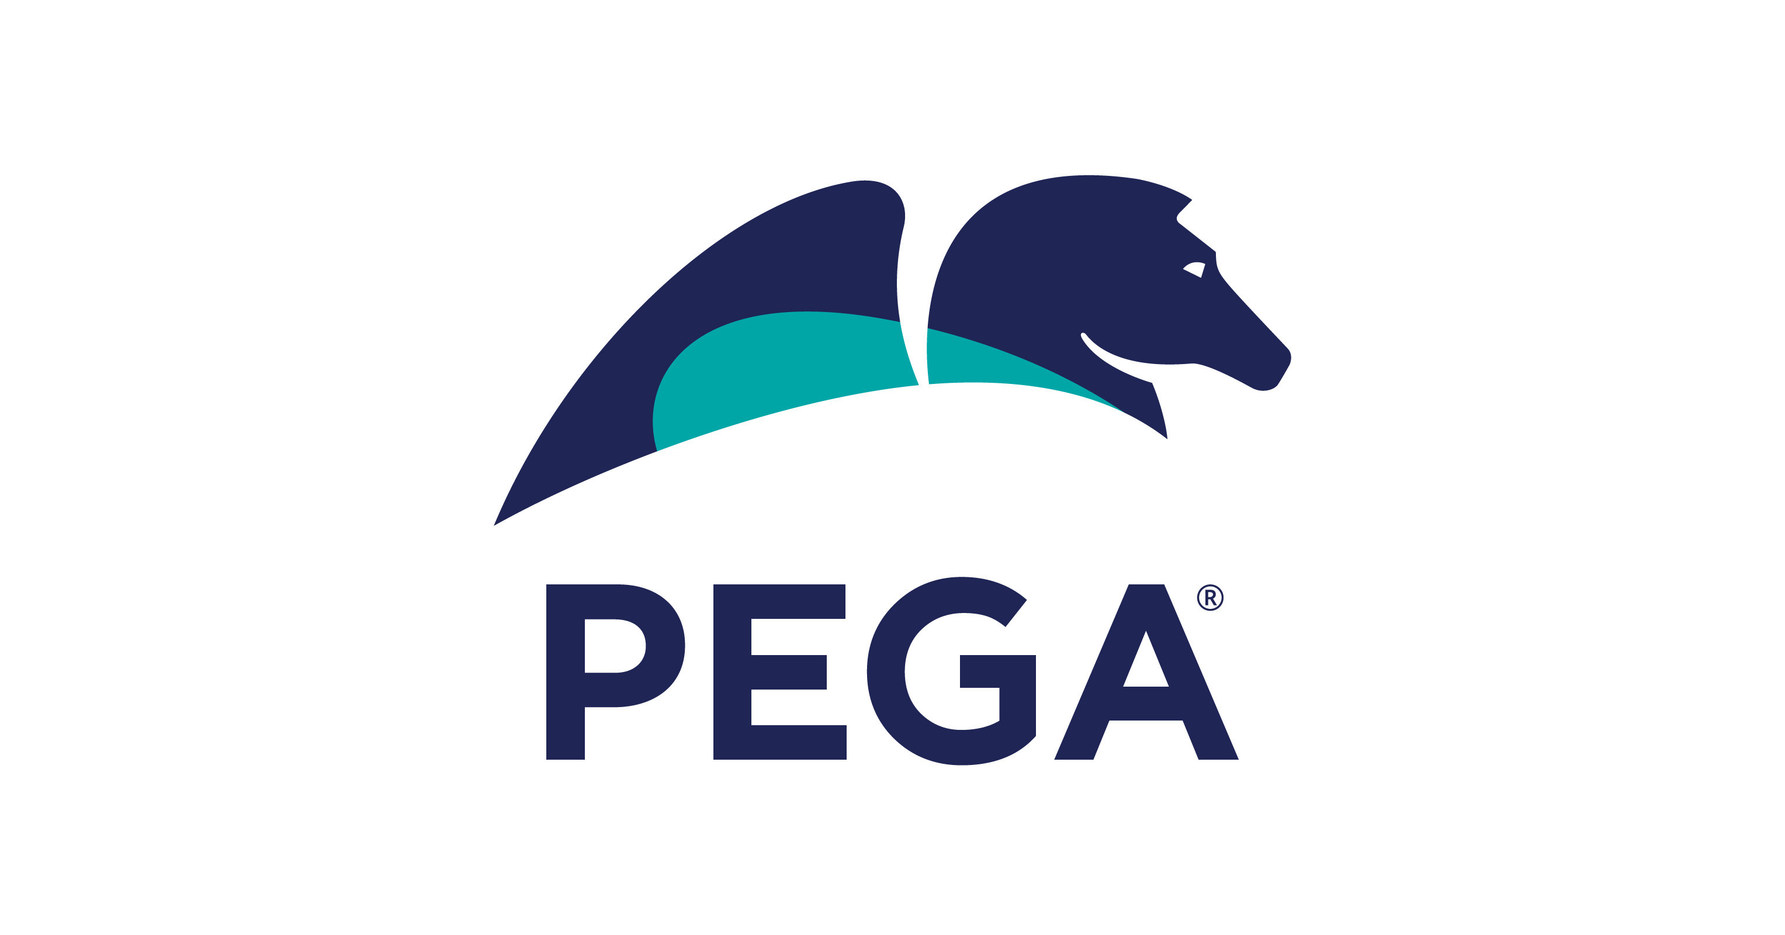 Pega’s Clients, Culture, Market Leadership, and Sustainability Efforts Recognized for Continued Excellence